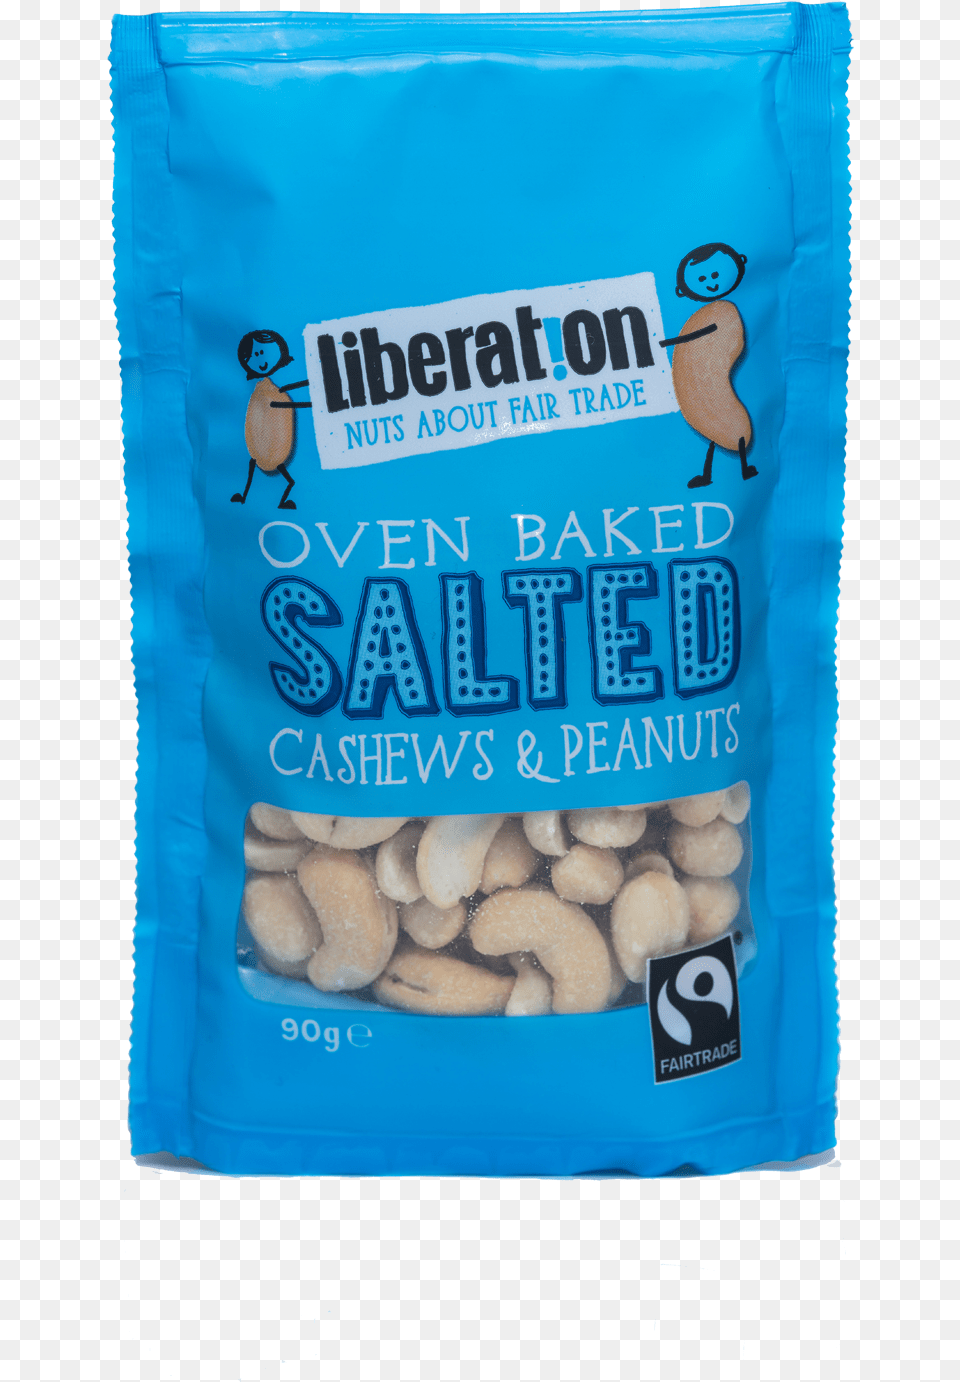 Liberation Oven Baked Salted Cashews Amp Peanuts Cashew, Food, Nut, Plant, Produce Free Transparent Png